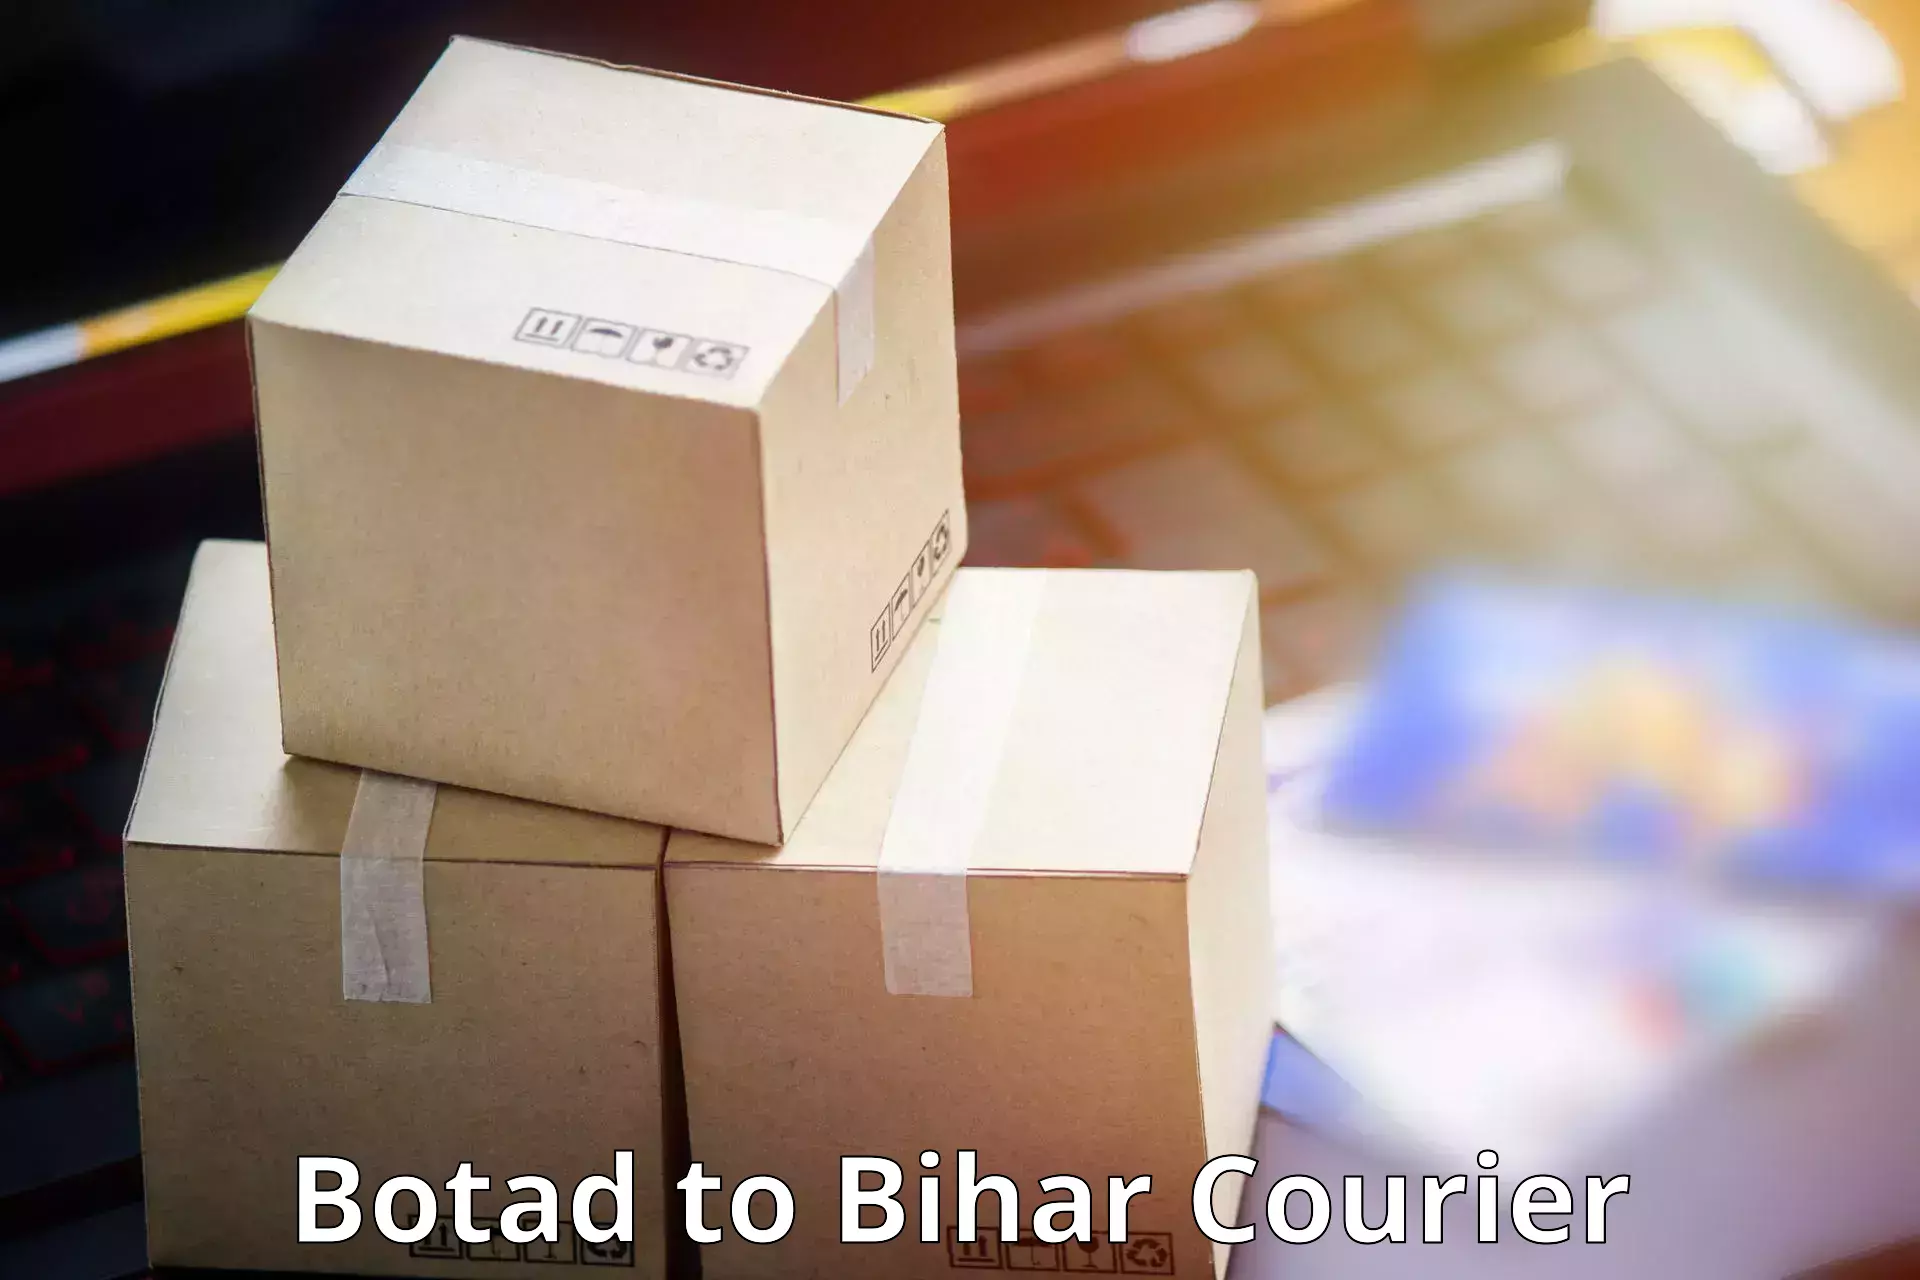 24/7 courier service Botad to Forbesganj